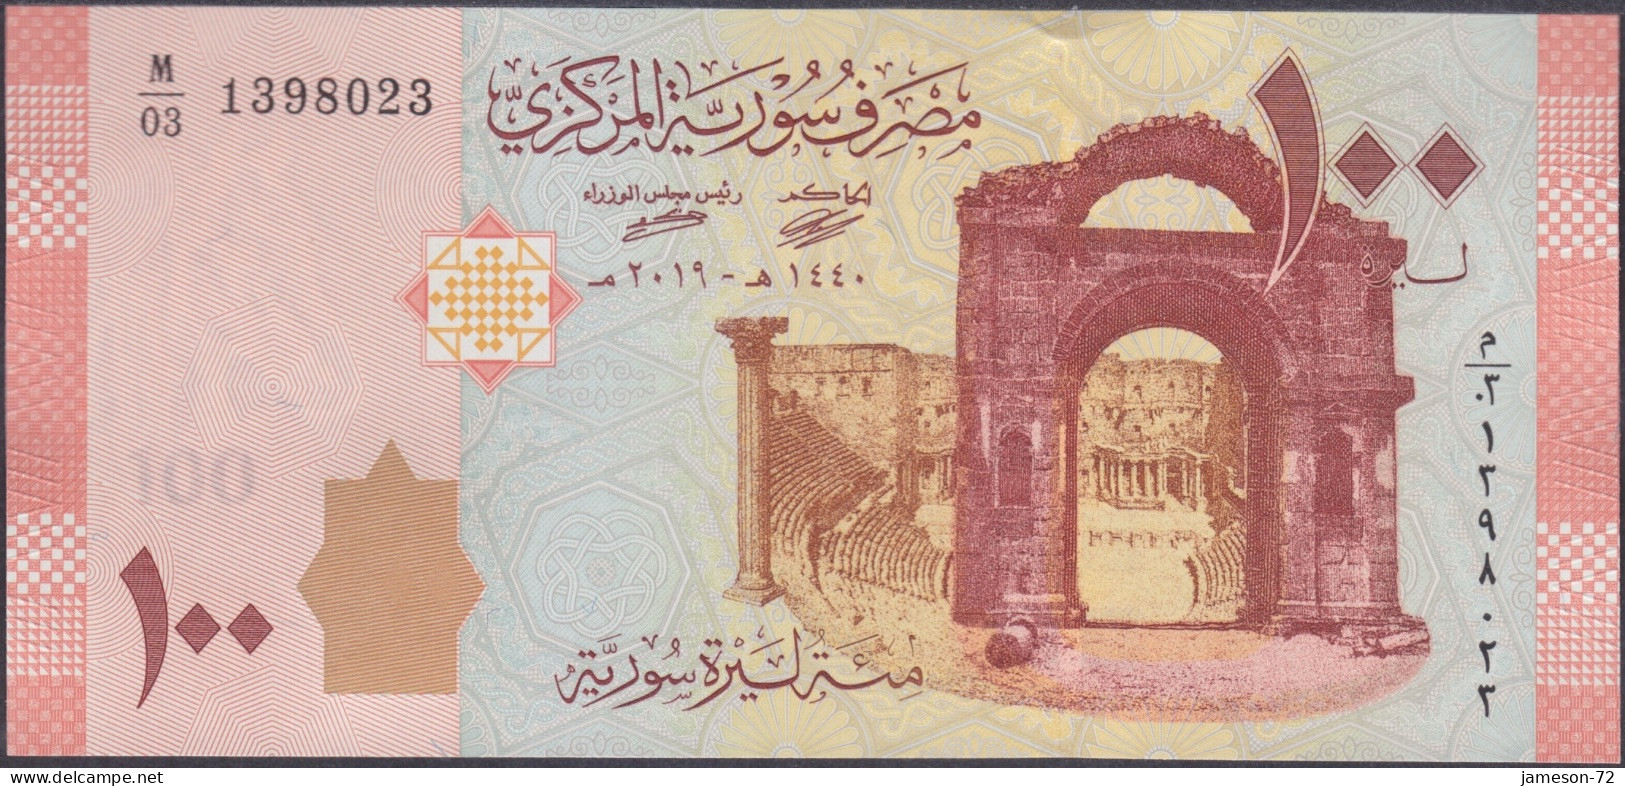 SYRIA - 100 Pounds AH1440 2019AD P# 113 Middle East Banknote - Edelweiss Coins - Syria